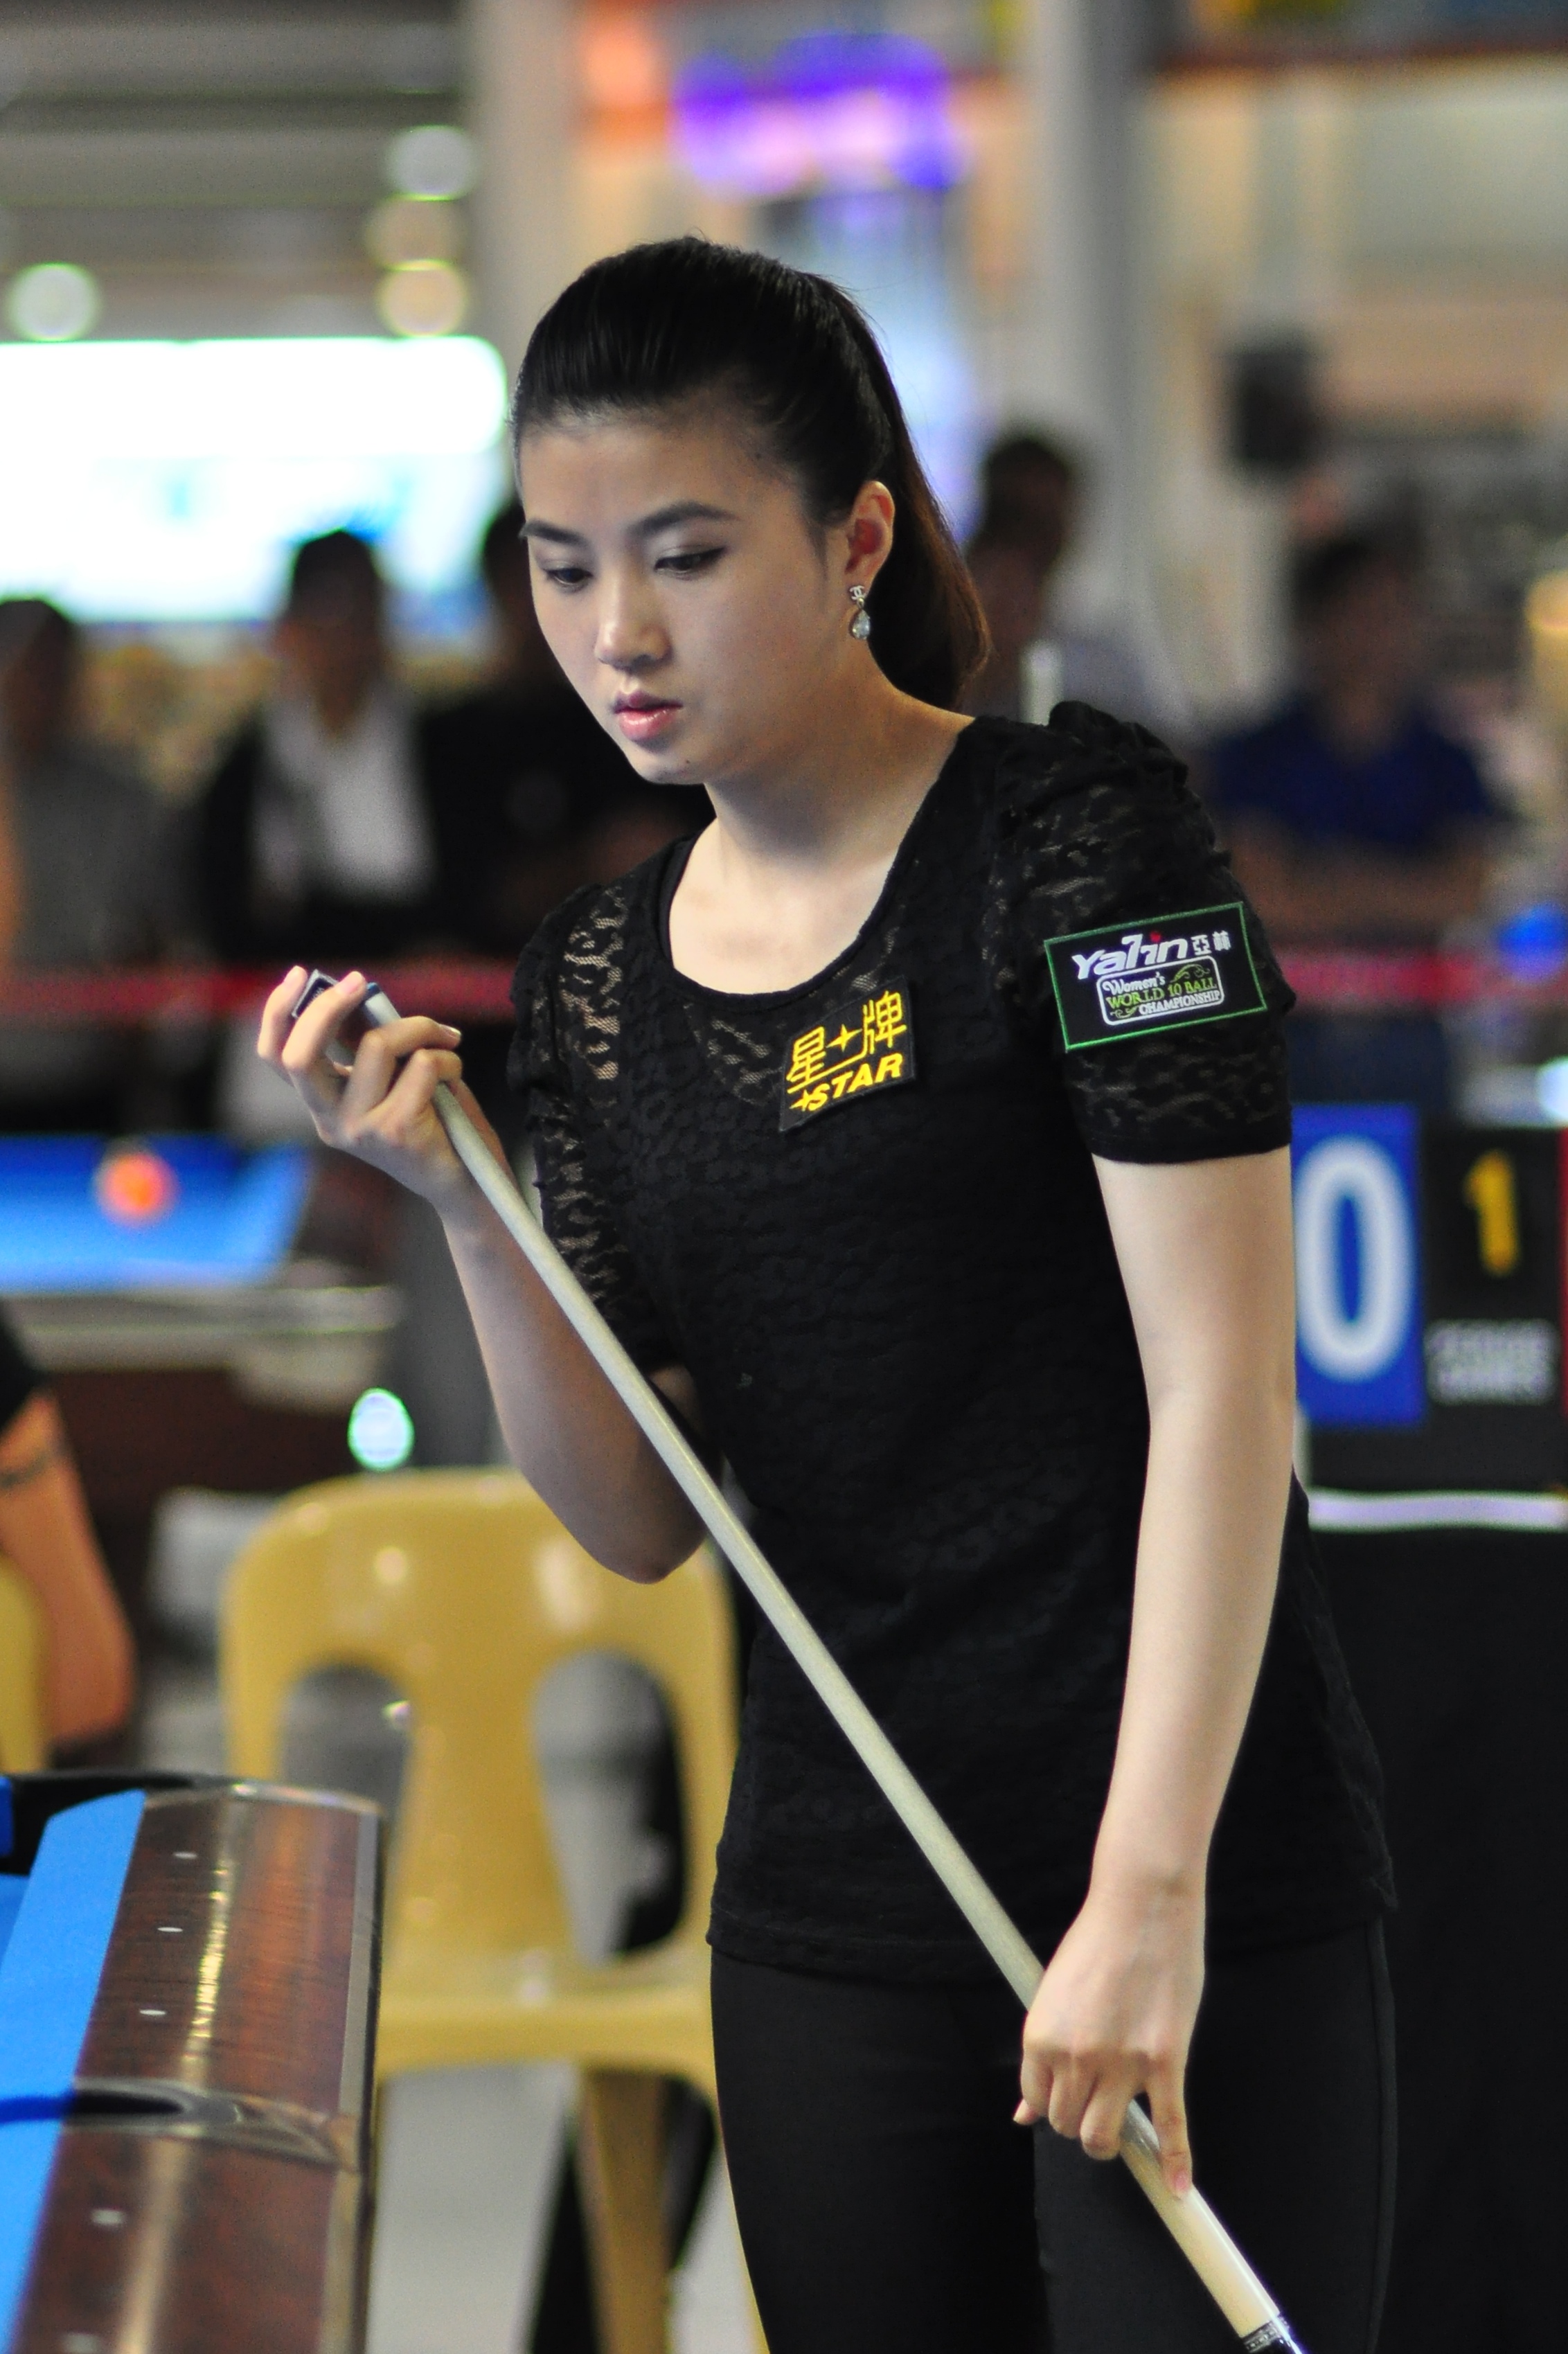 Women’s World 10 Ball Championship Day 2 wrapup and pics